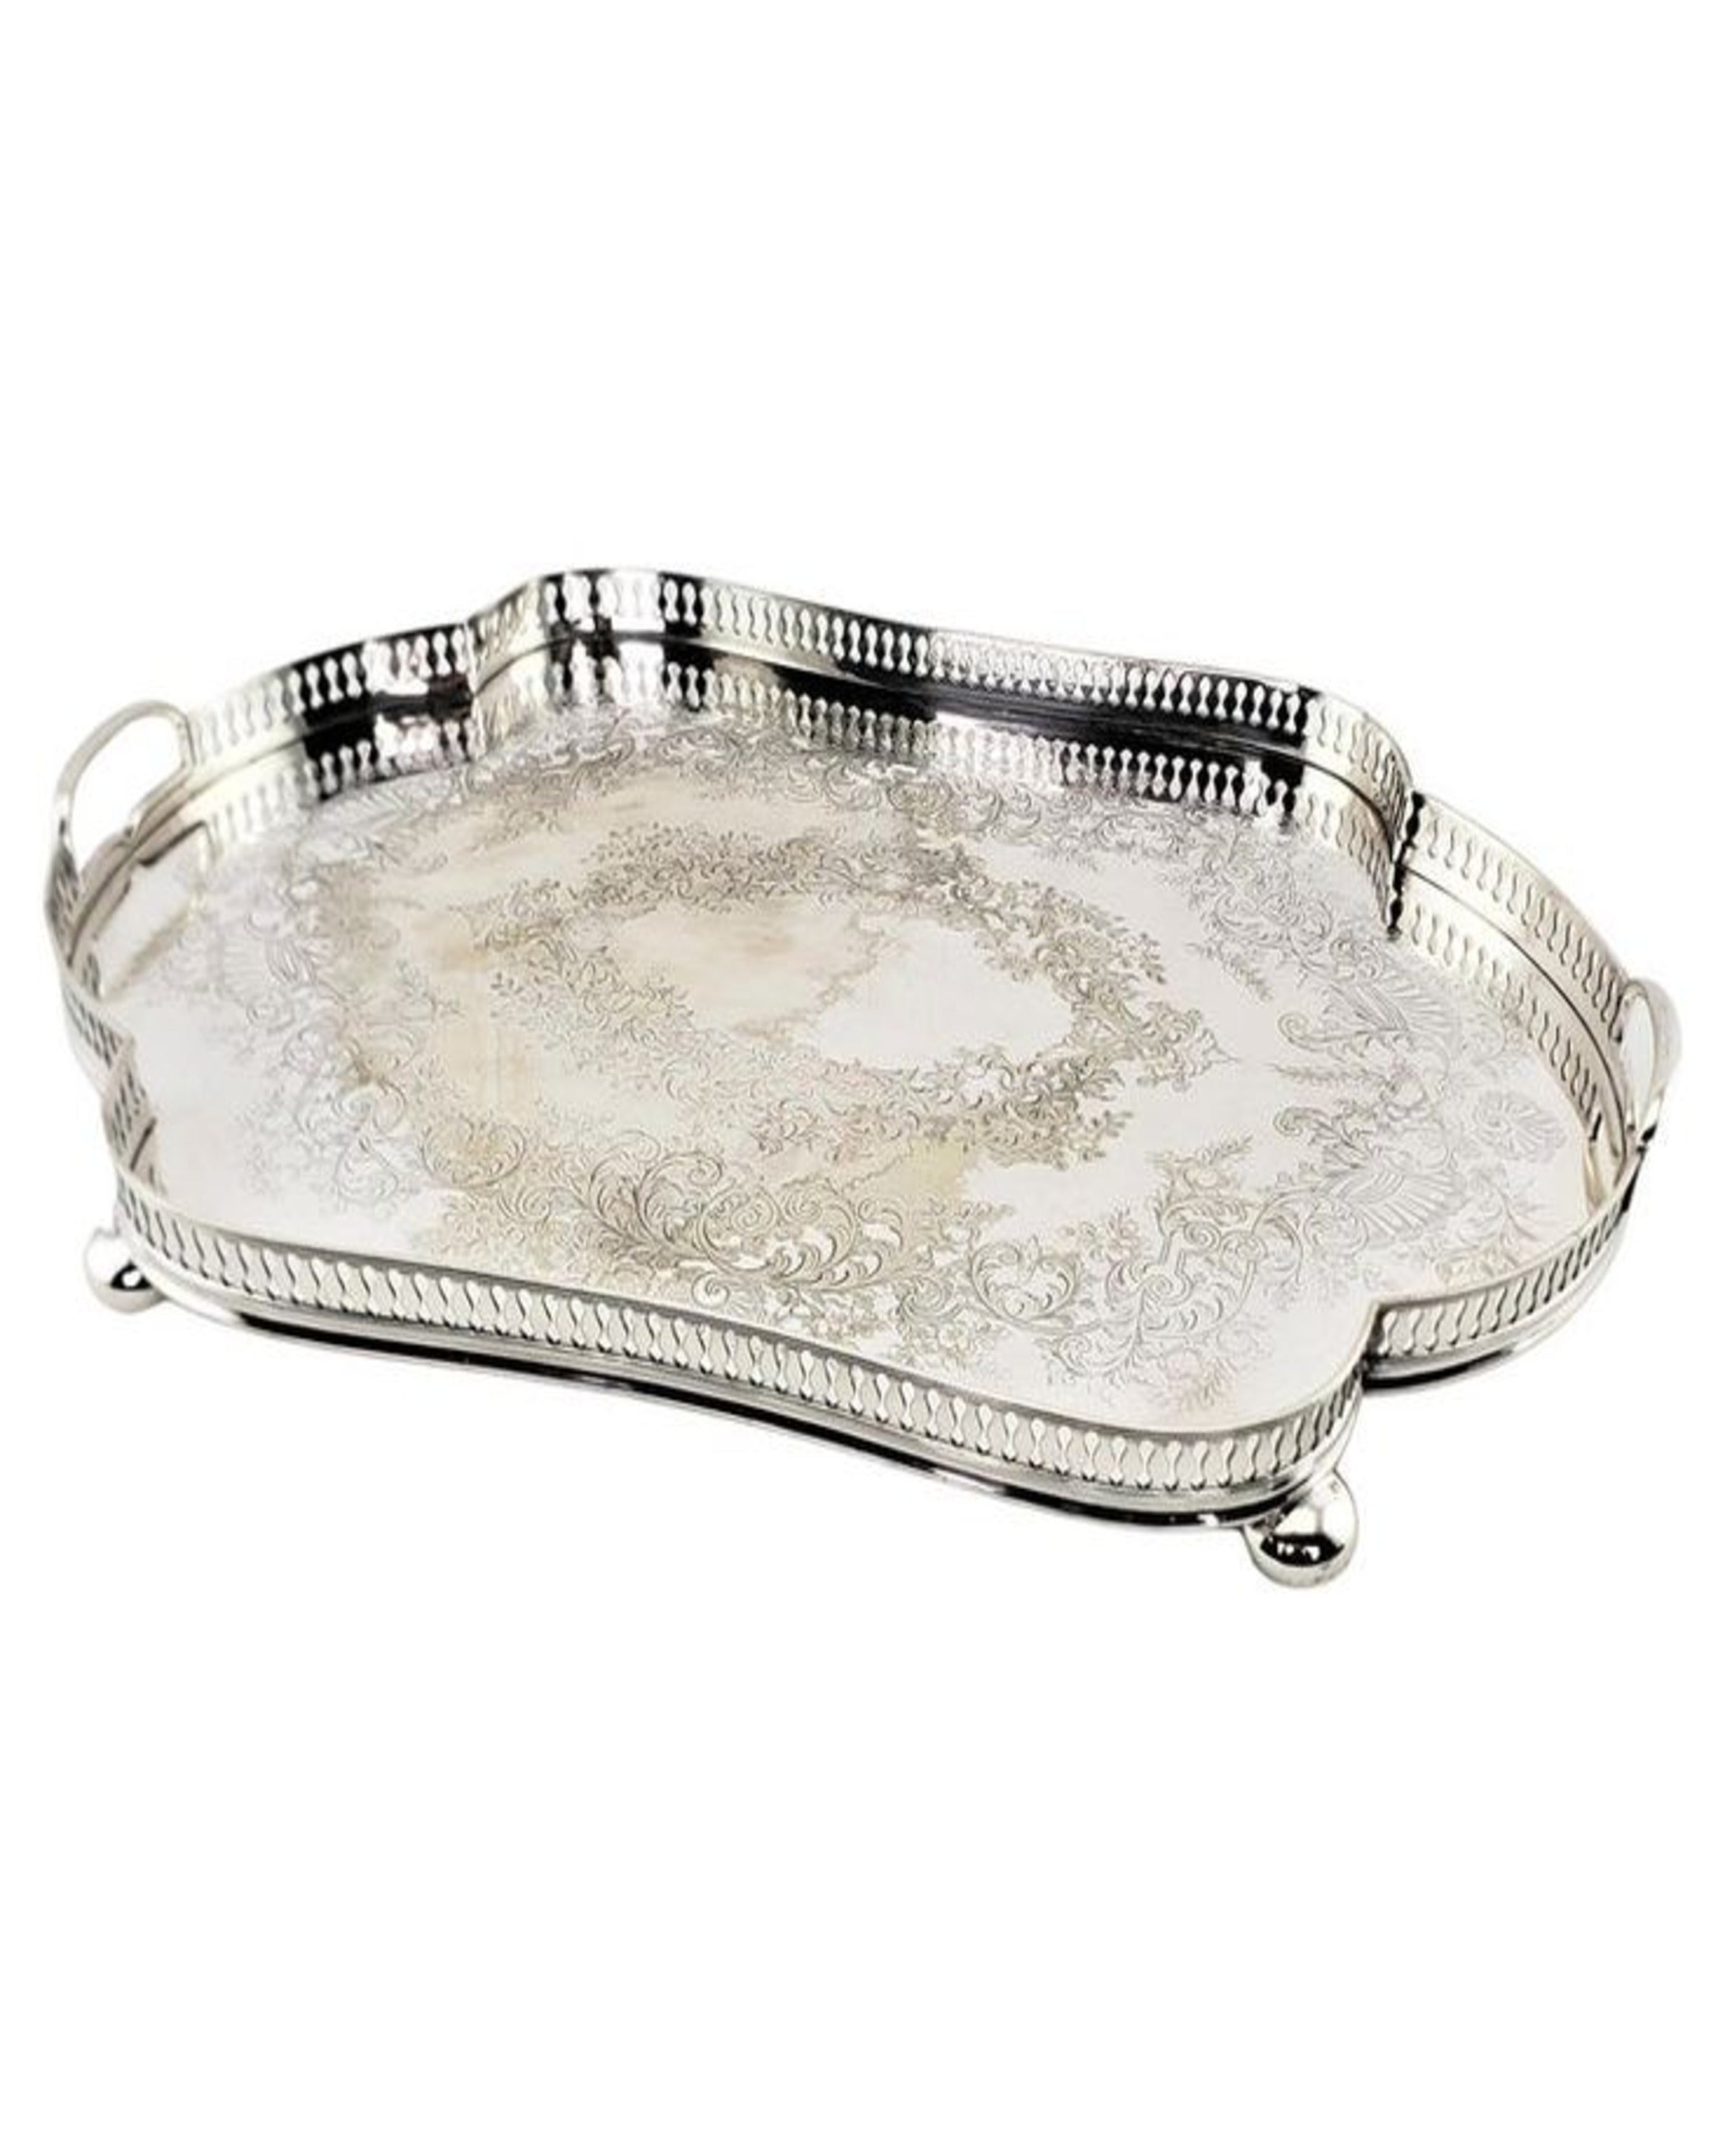 Sunrise Fusion Silver Plated Tray ANGIE HOMES